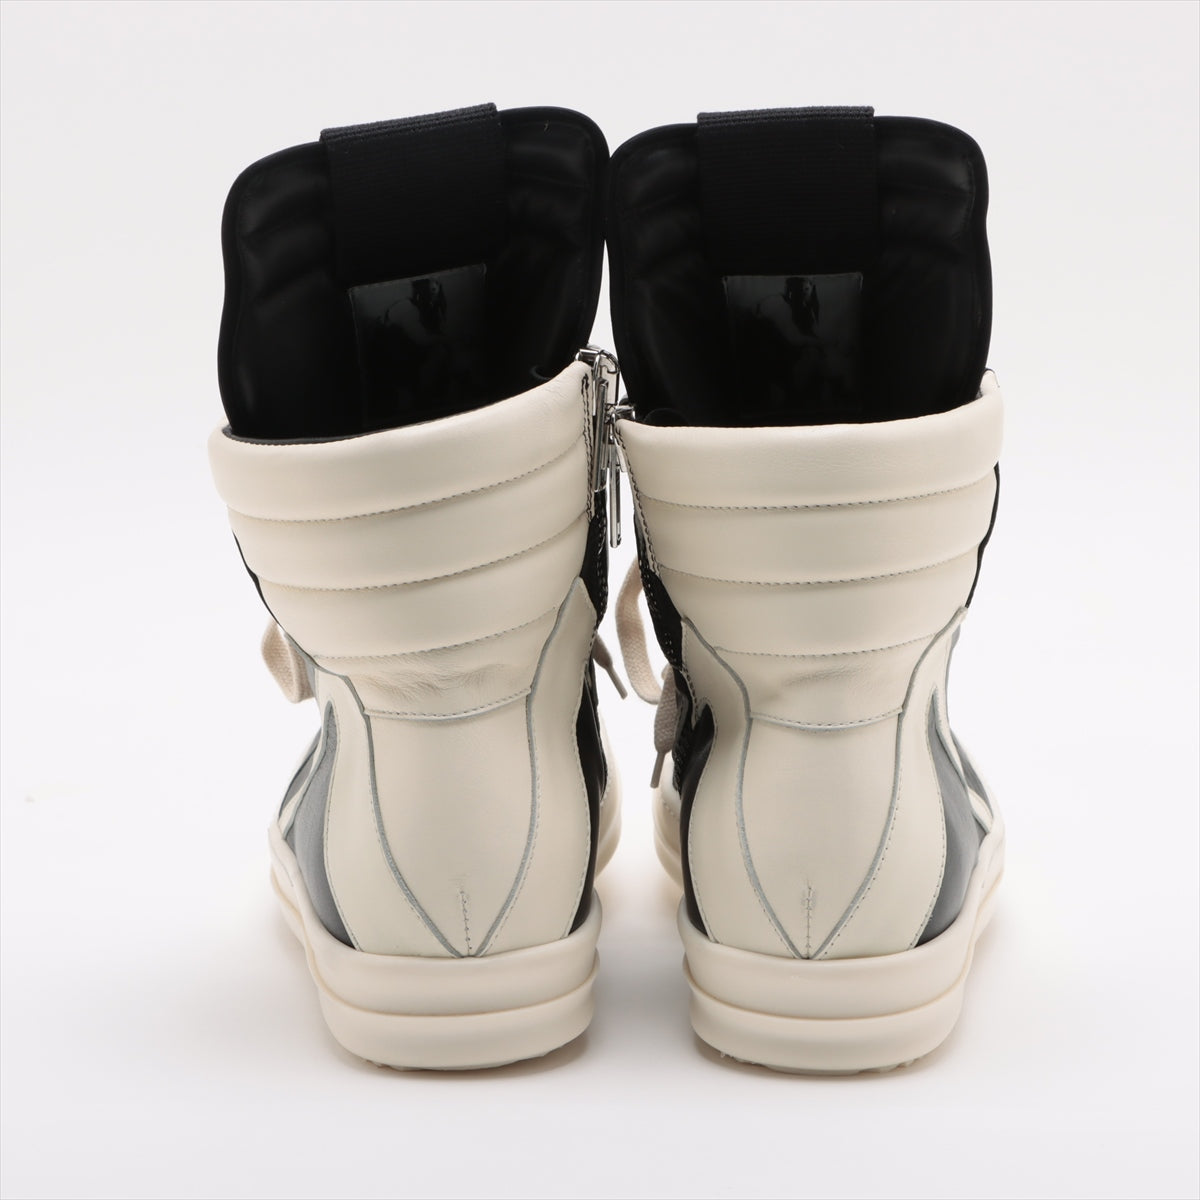 Rick Owens Geobasket Leather High-top Sneakers 43 Men's Black × White 3621 Is there a replacement string